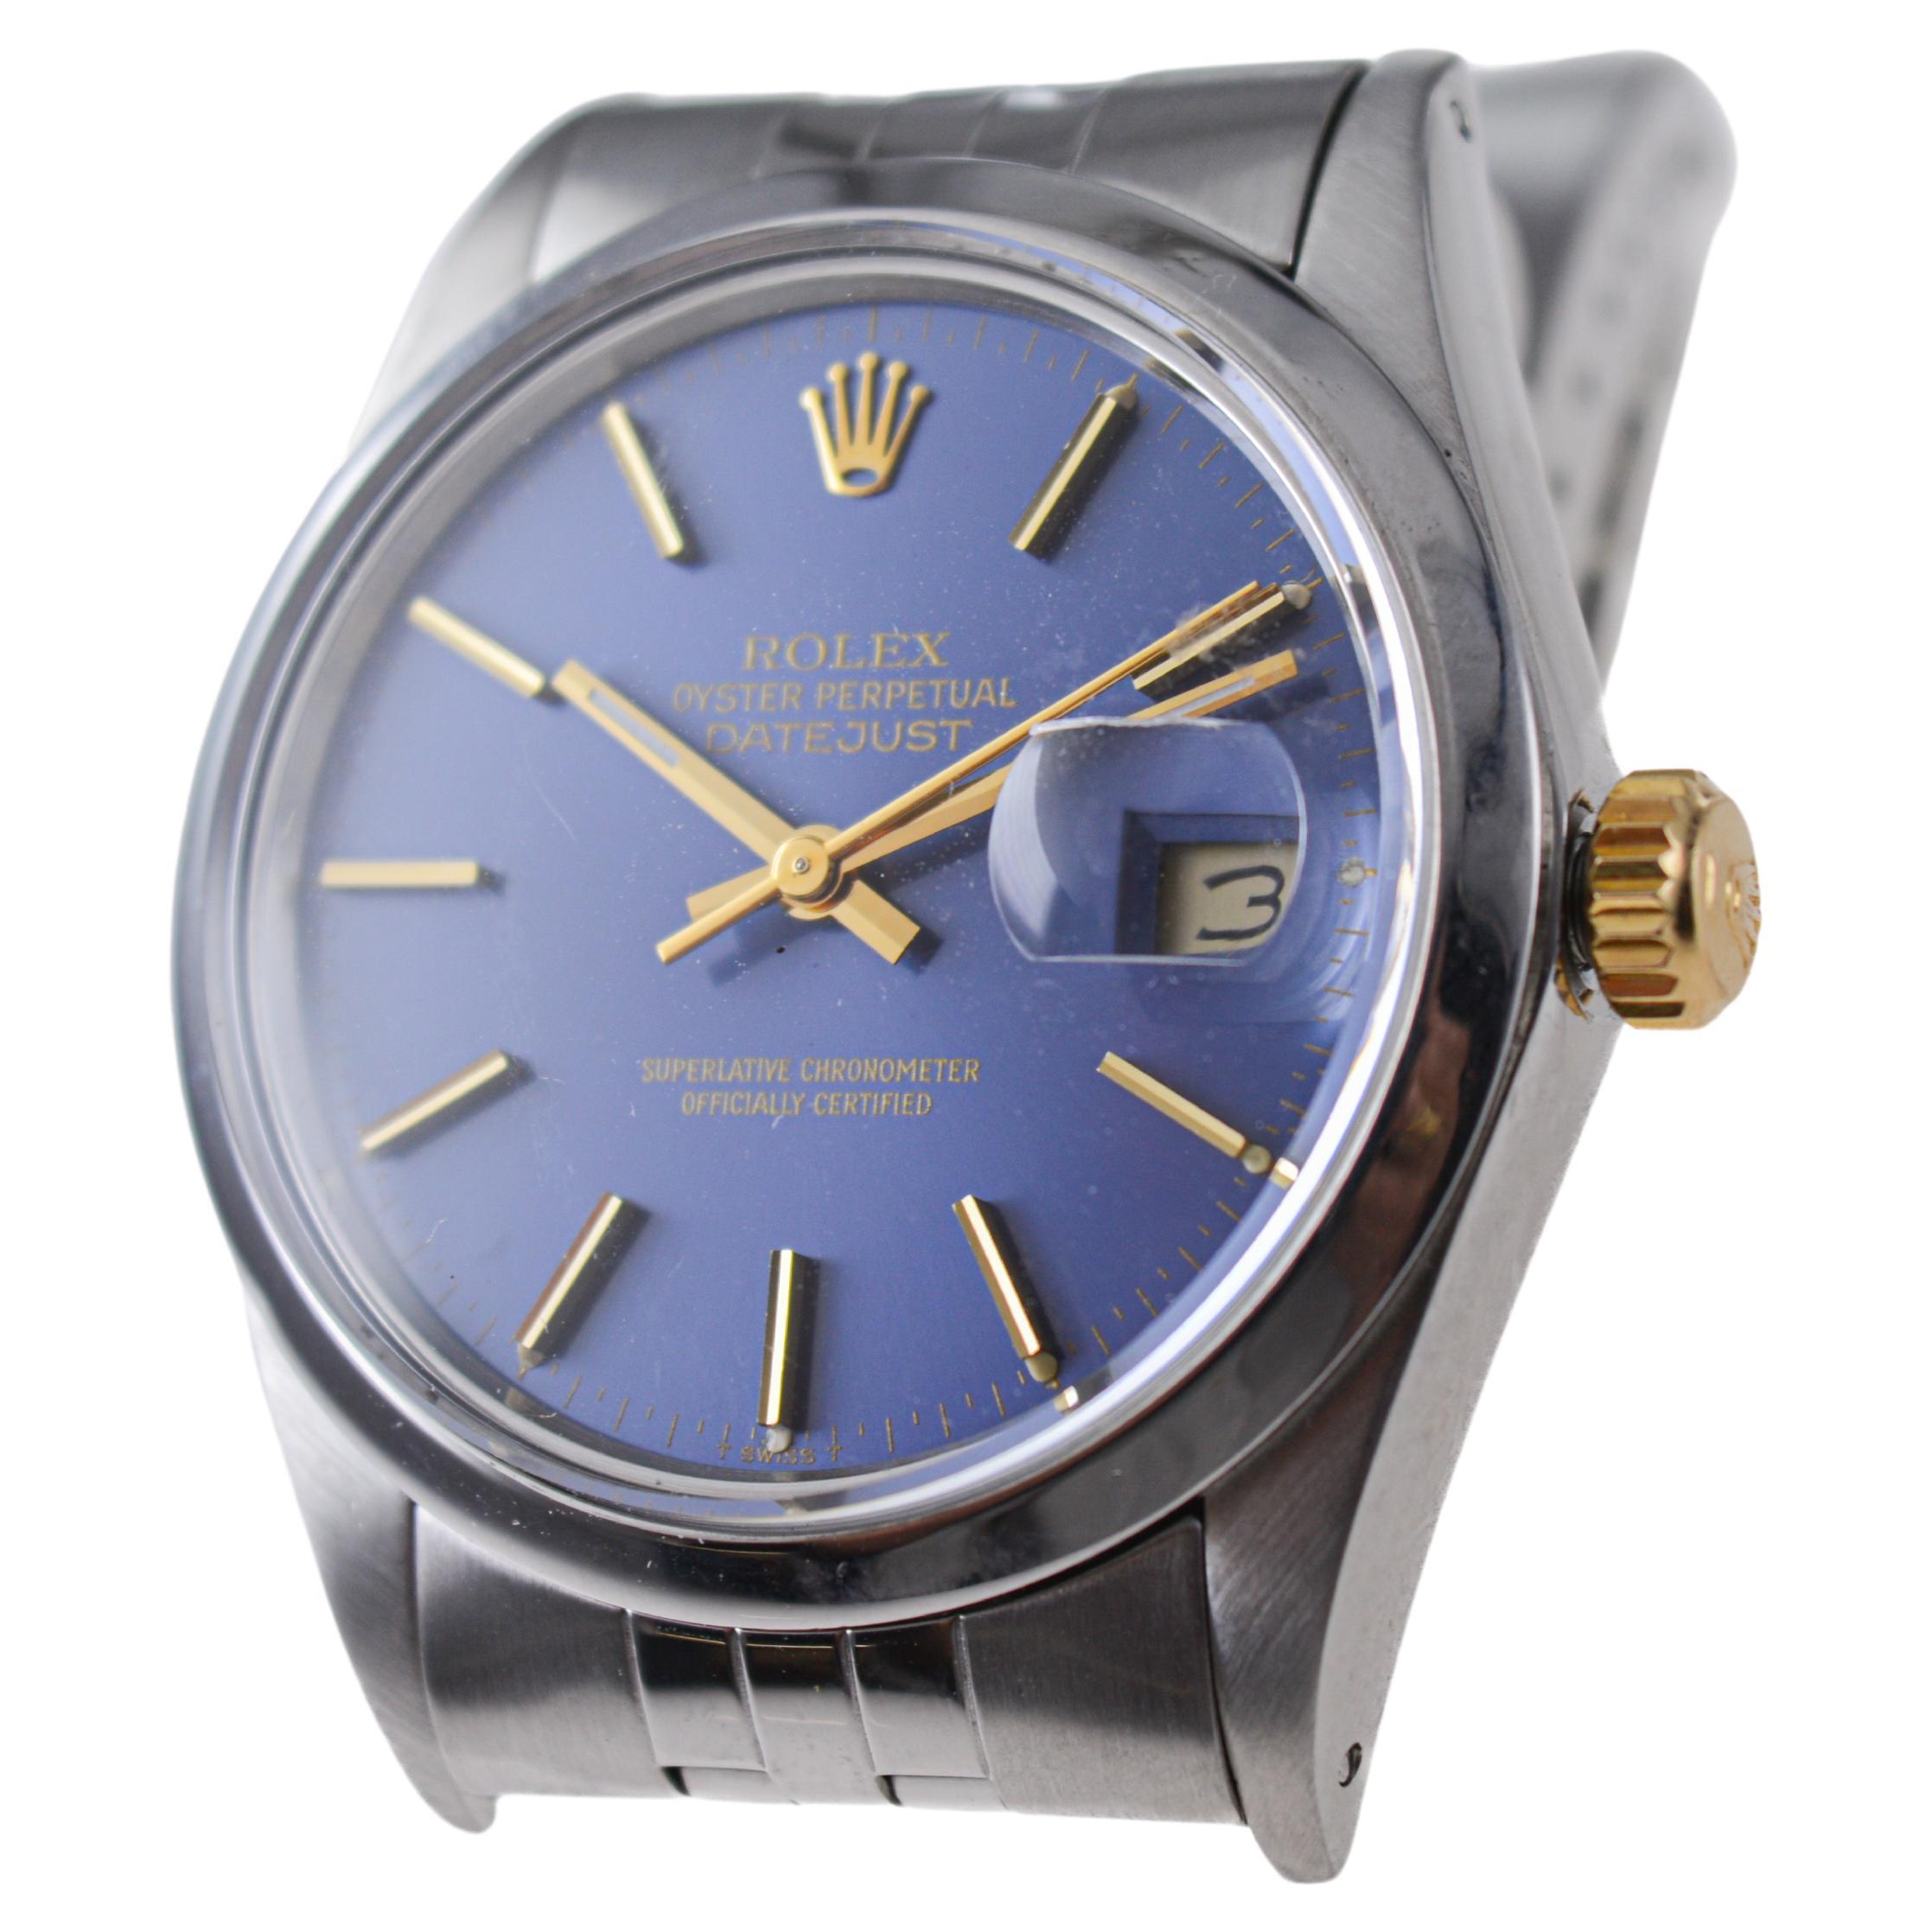 Rolex Steel Oyster Perpetual Datejust with Rare Original Blue Dial from 1987 For Sale 2